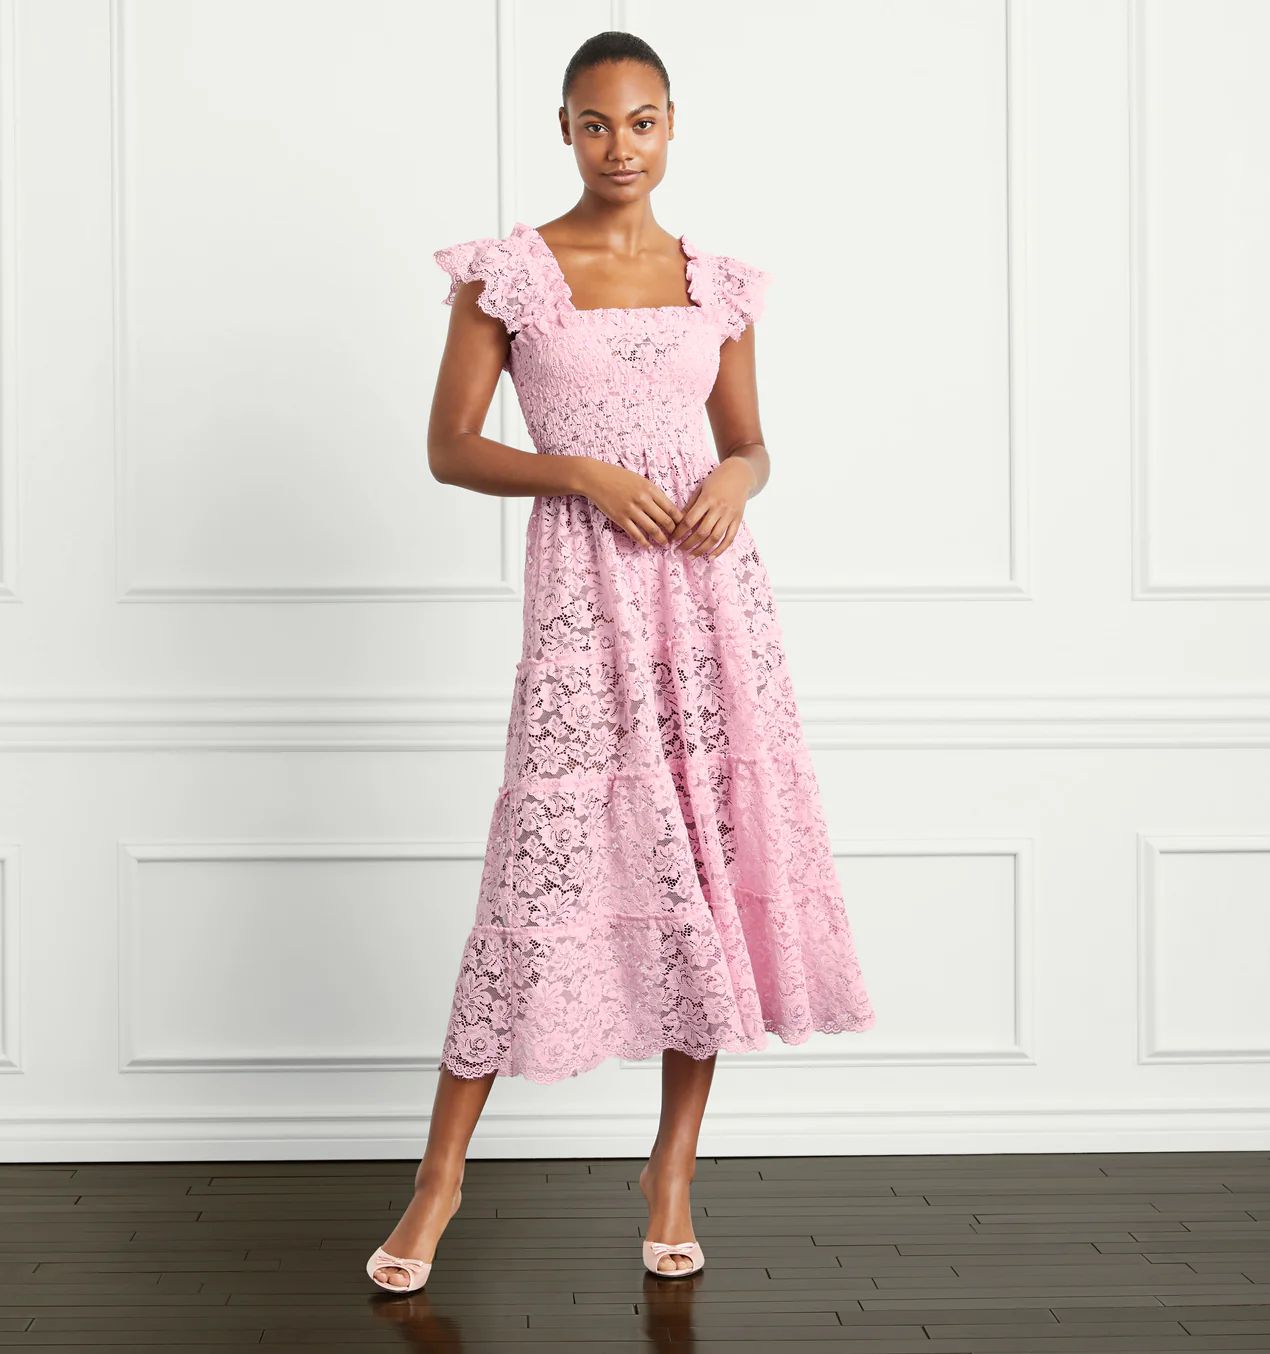 The Lace Ellie Nap Dress - Pink Lace | Hill House Home